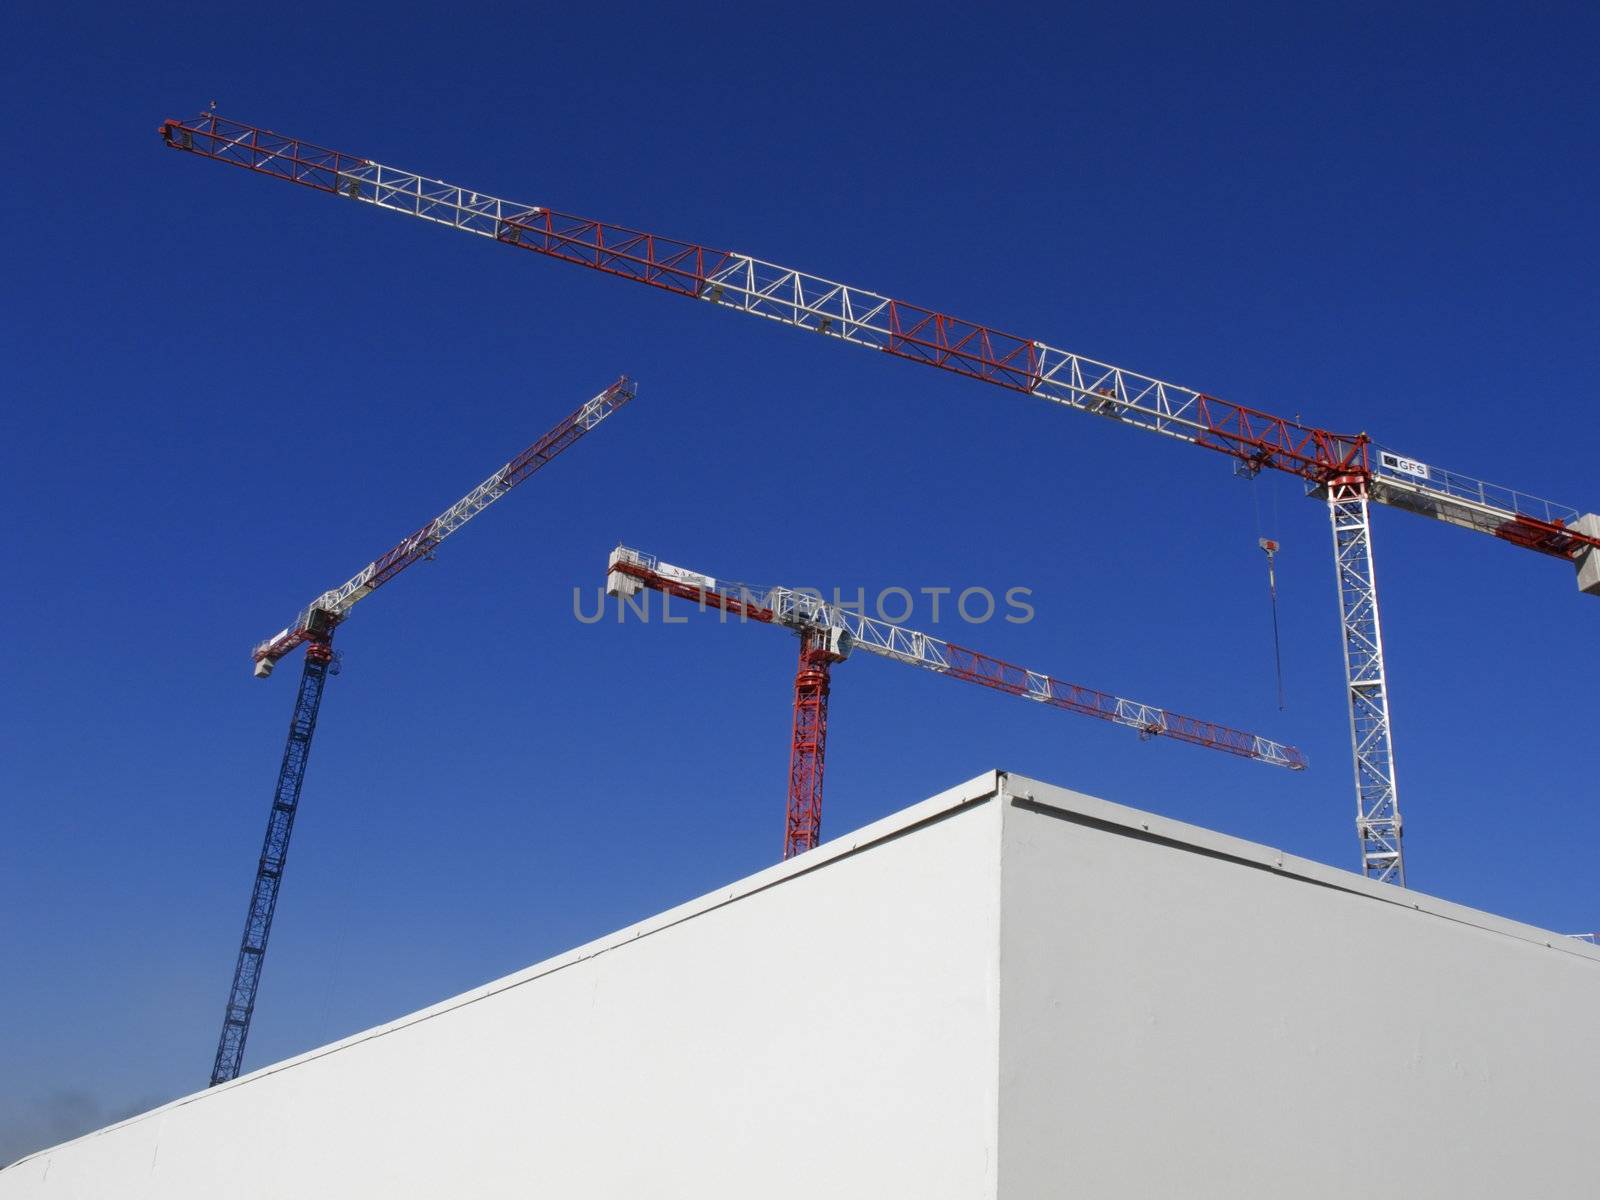 Construction cranes in the Port Vell, Barcelona, Catalonia, Spain